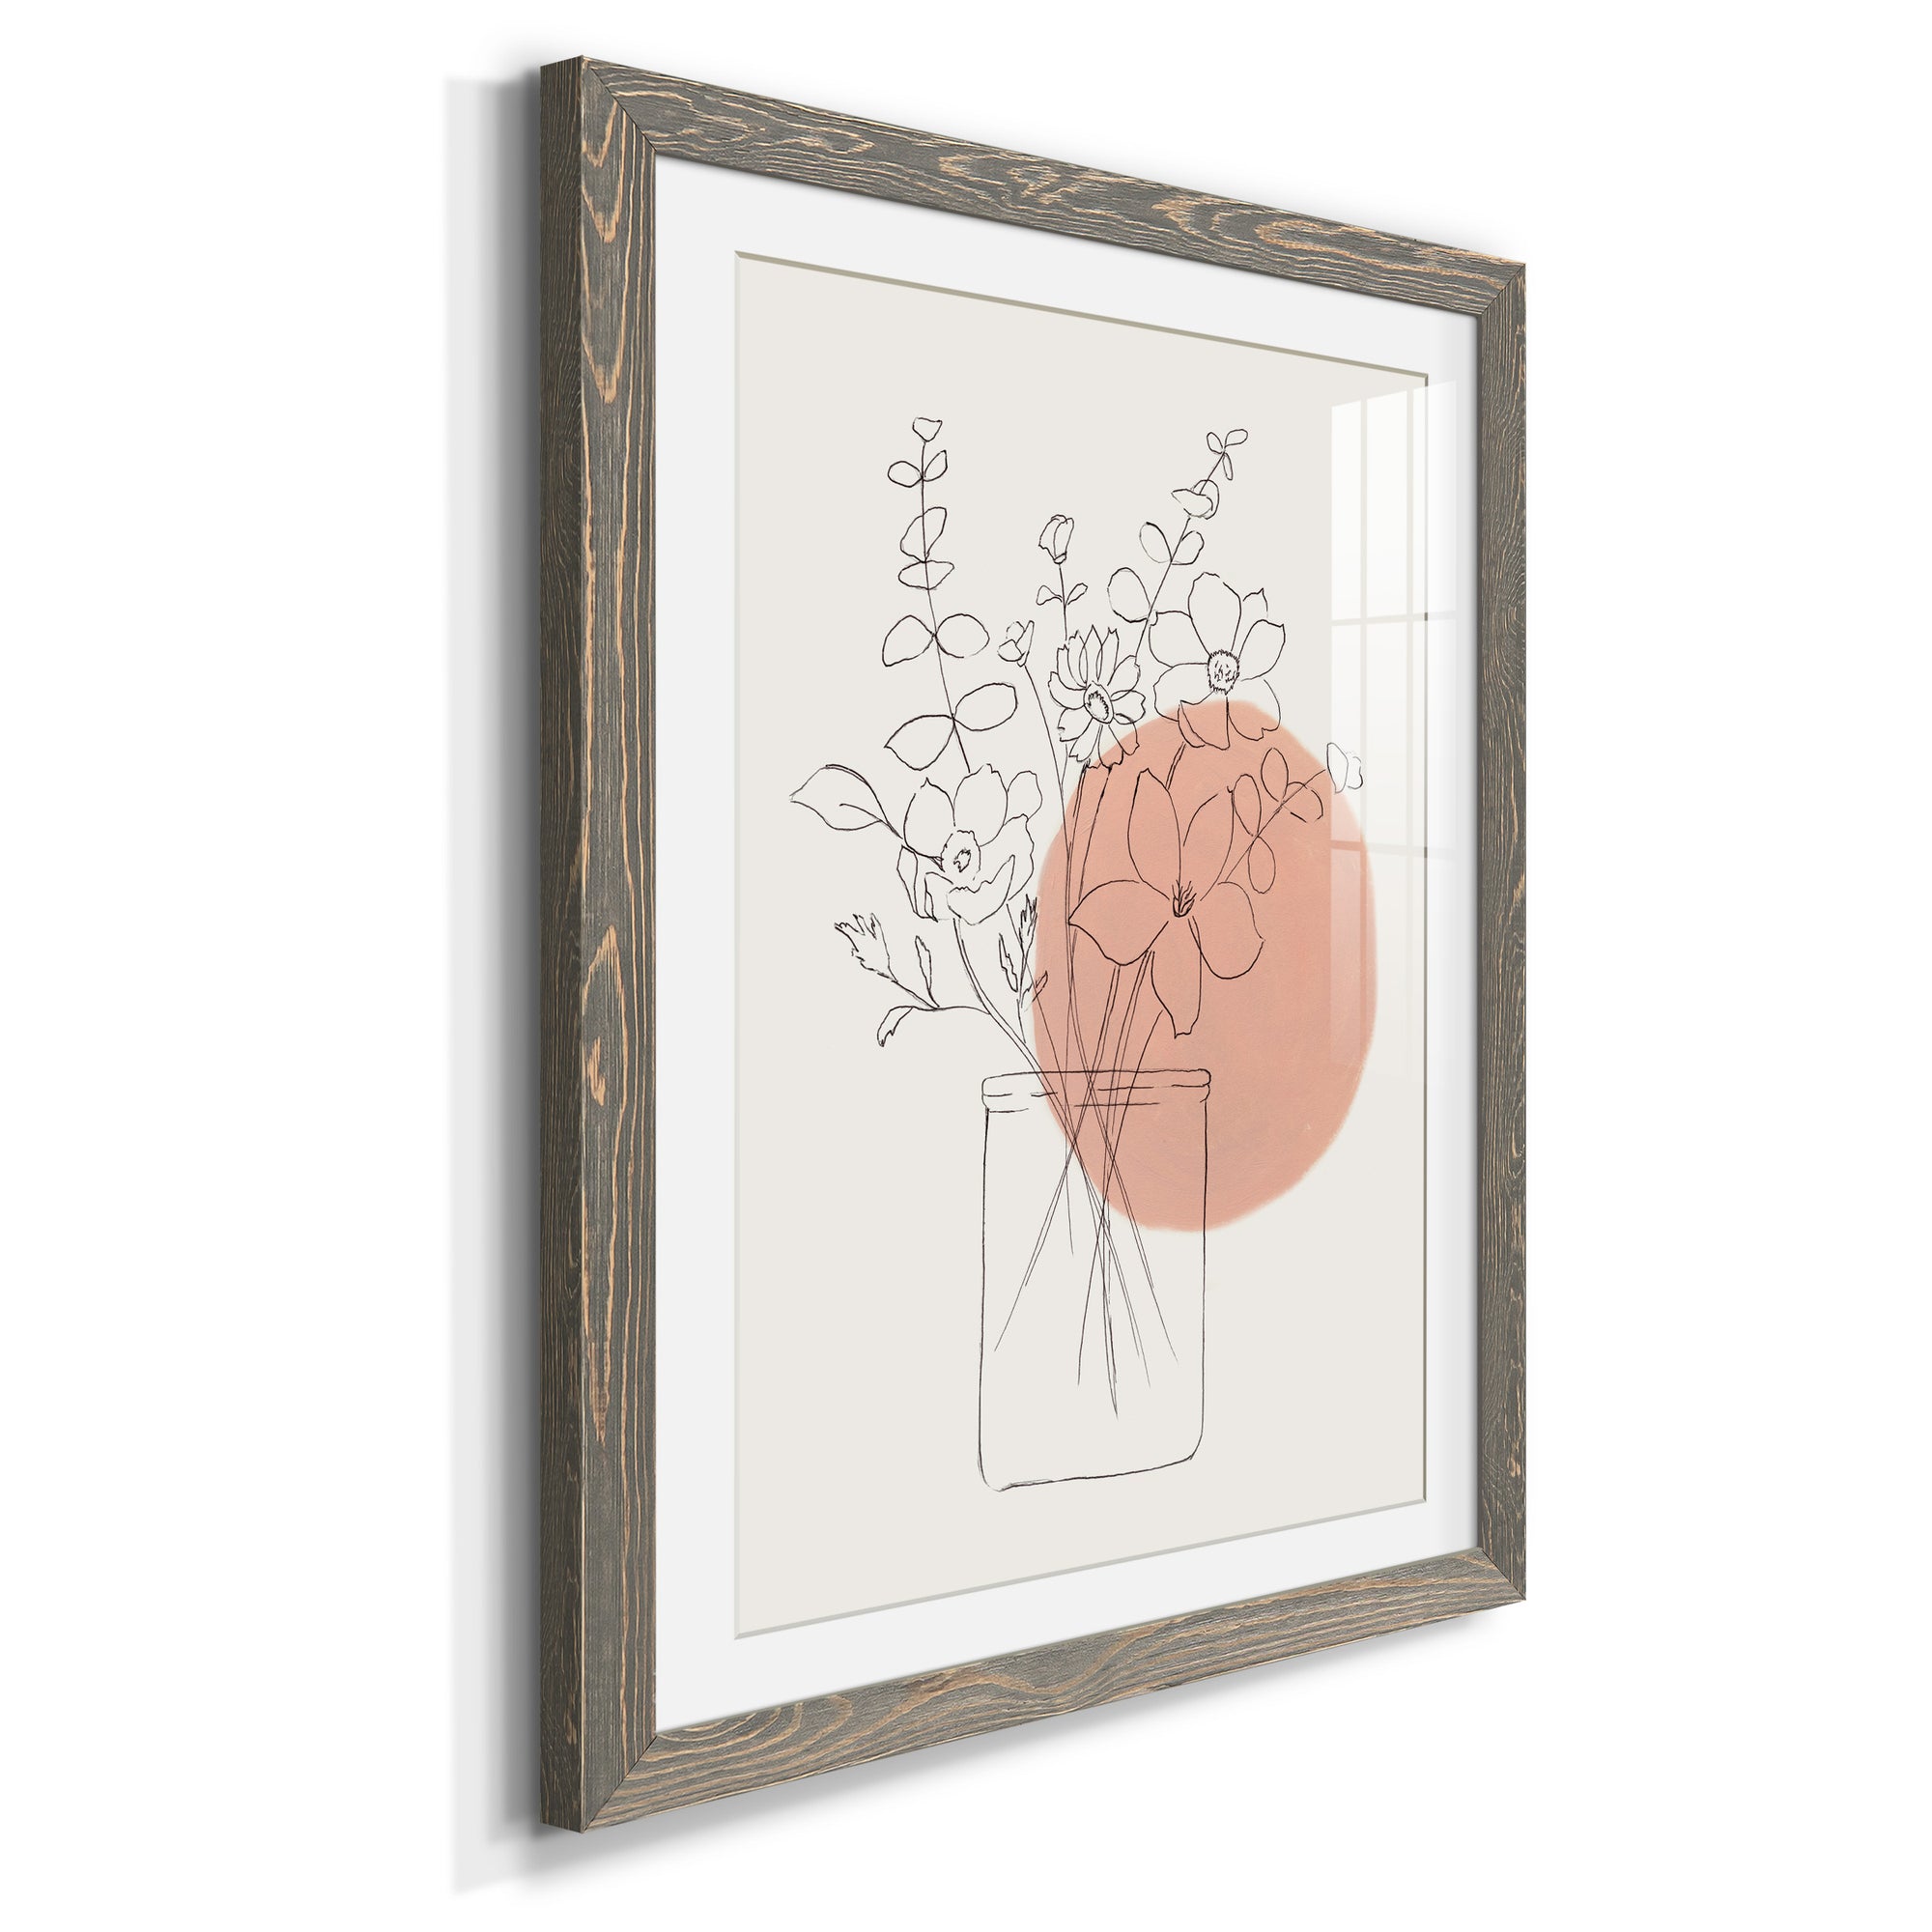 Contemporary Wildflower Bouquet - Premium Framed Print - Distressed Barnwood Frame - Ready to Hang